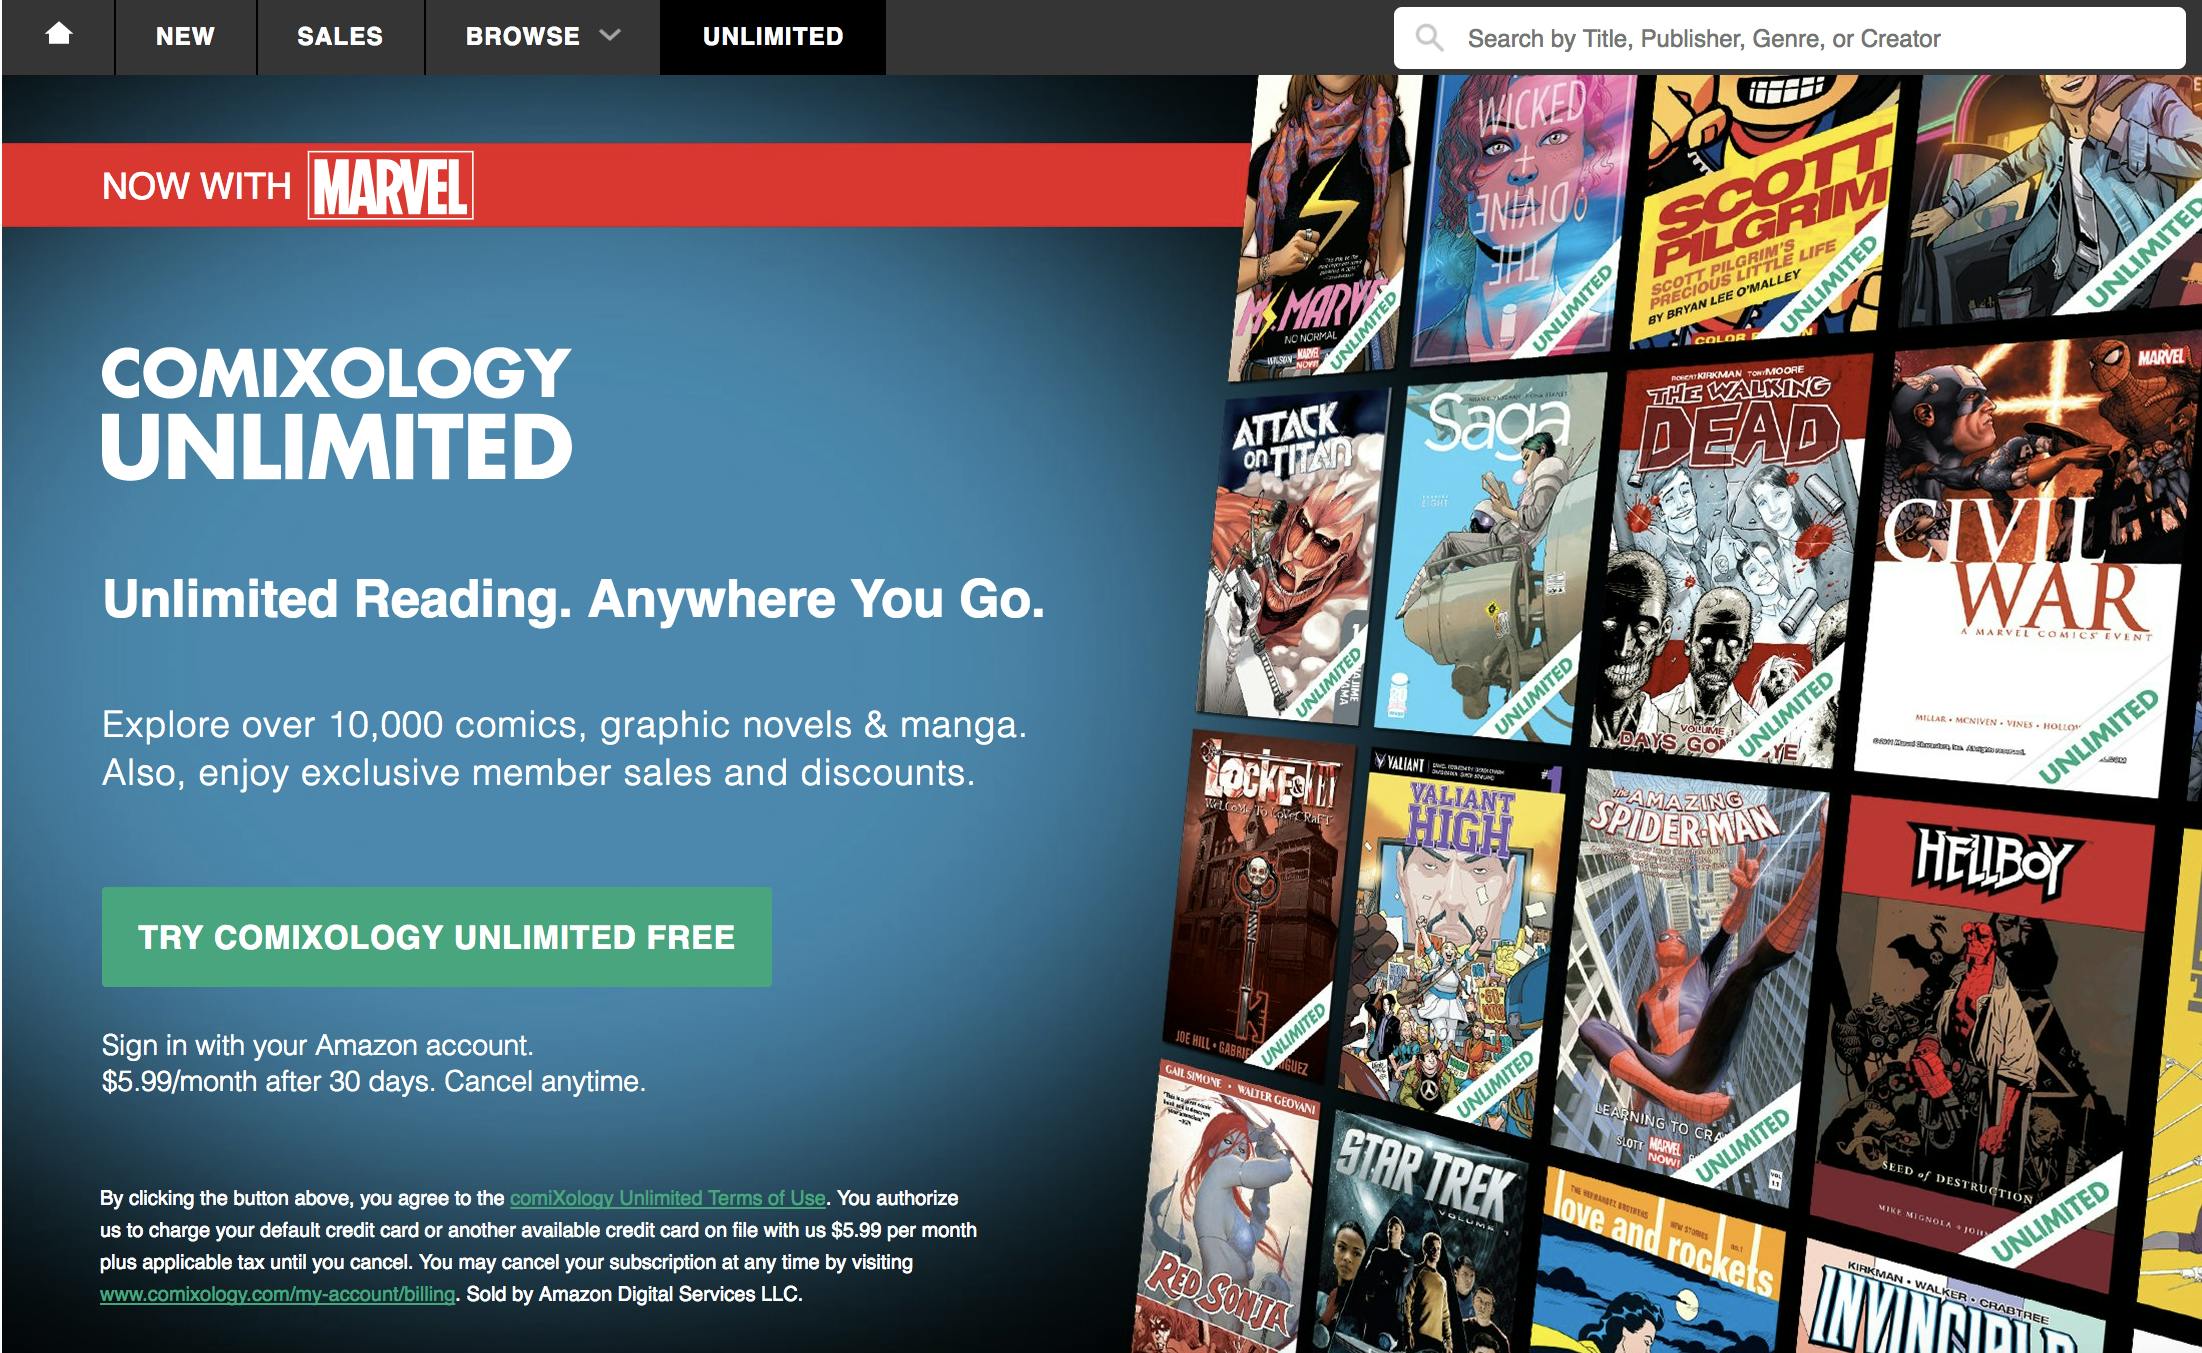 what is comixology unlimited